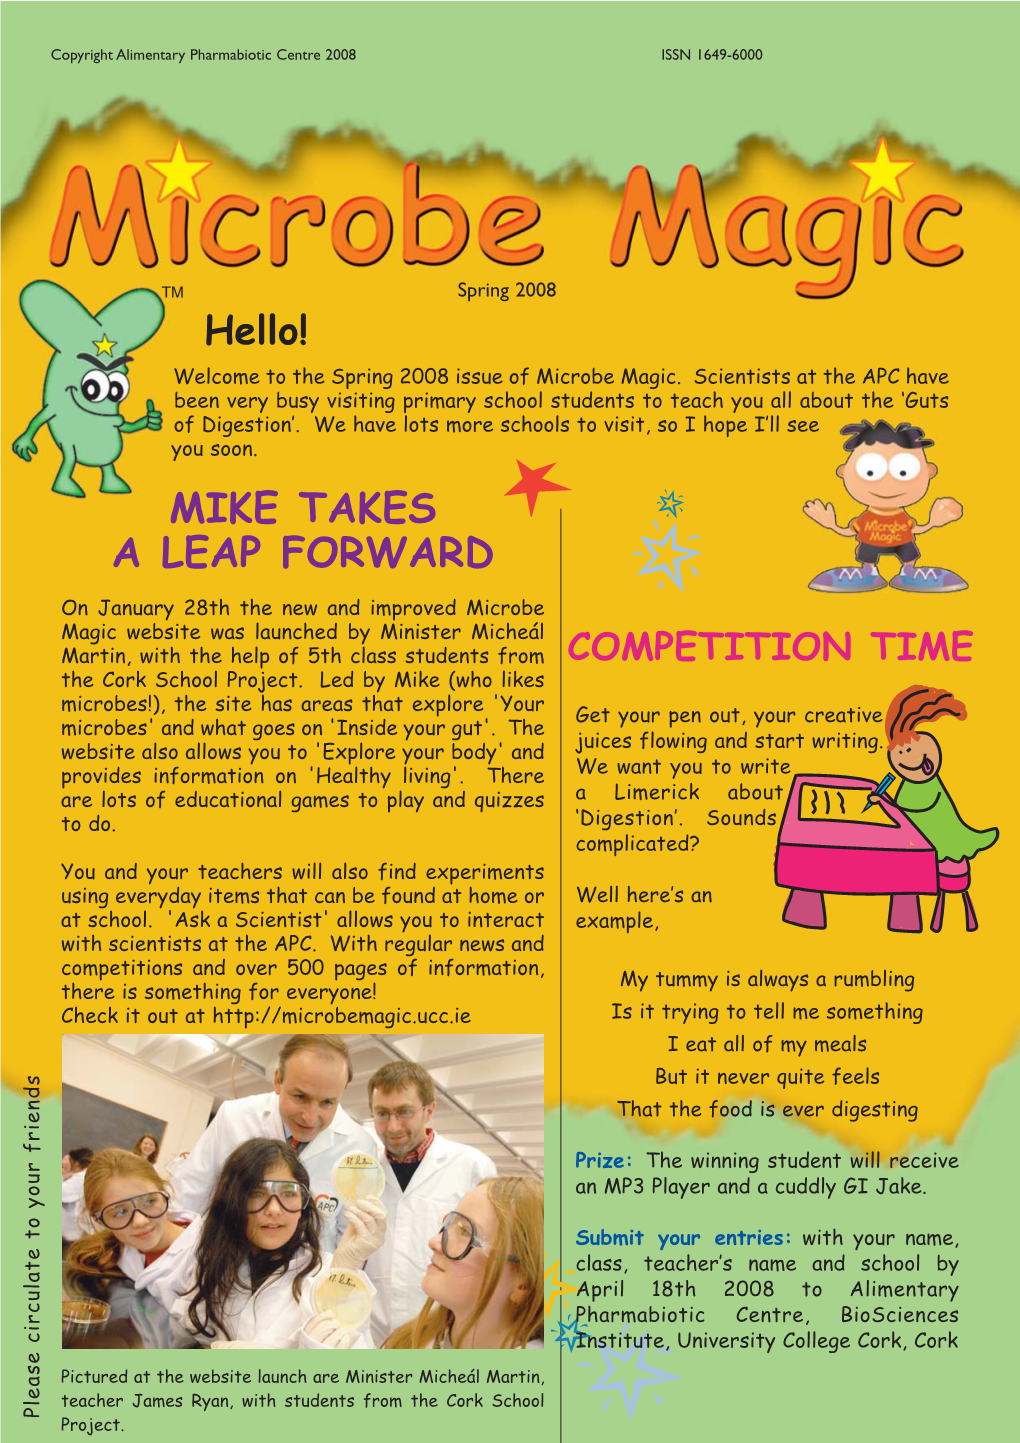 Hello! Welcome to the Spring 2008 Issue of Microbe Magic